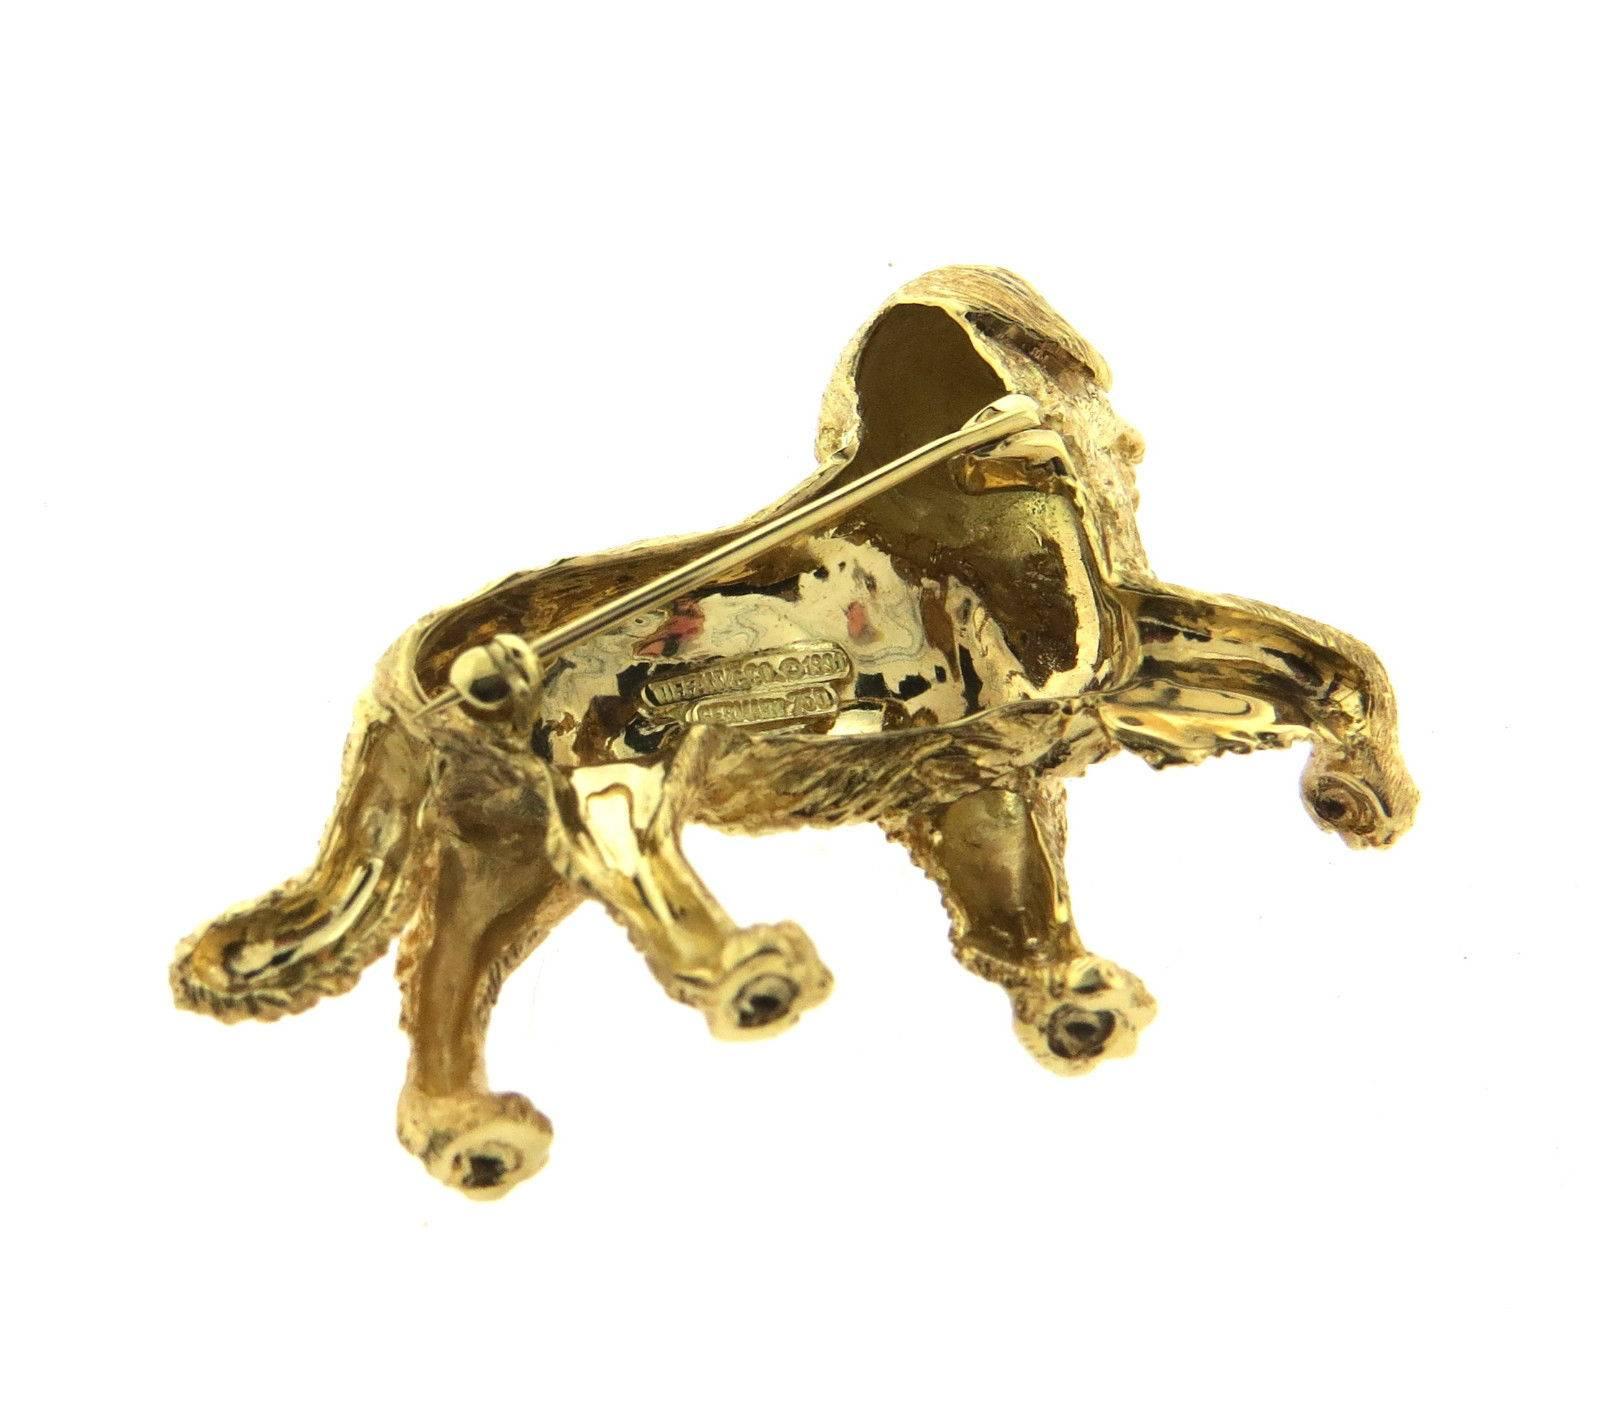 An 18k yellow gold dog brooch pin set with a 0.01ct G/VS diamond, and sapphires in the eyes.  Crafted by Tiffany, the brooch is 49mm x 35mm.  Marked: Tiffany & Co, 1991, 750, Germany.  The weight of the piece is 27.3 grams.